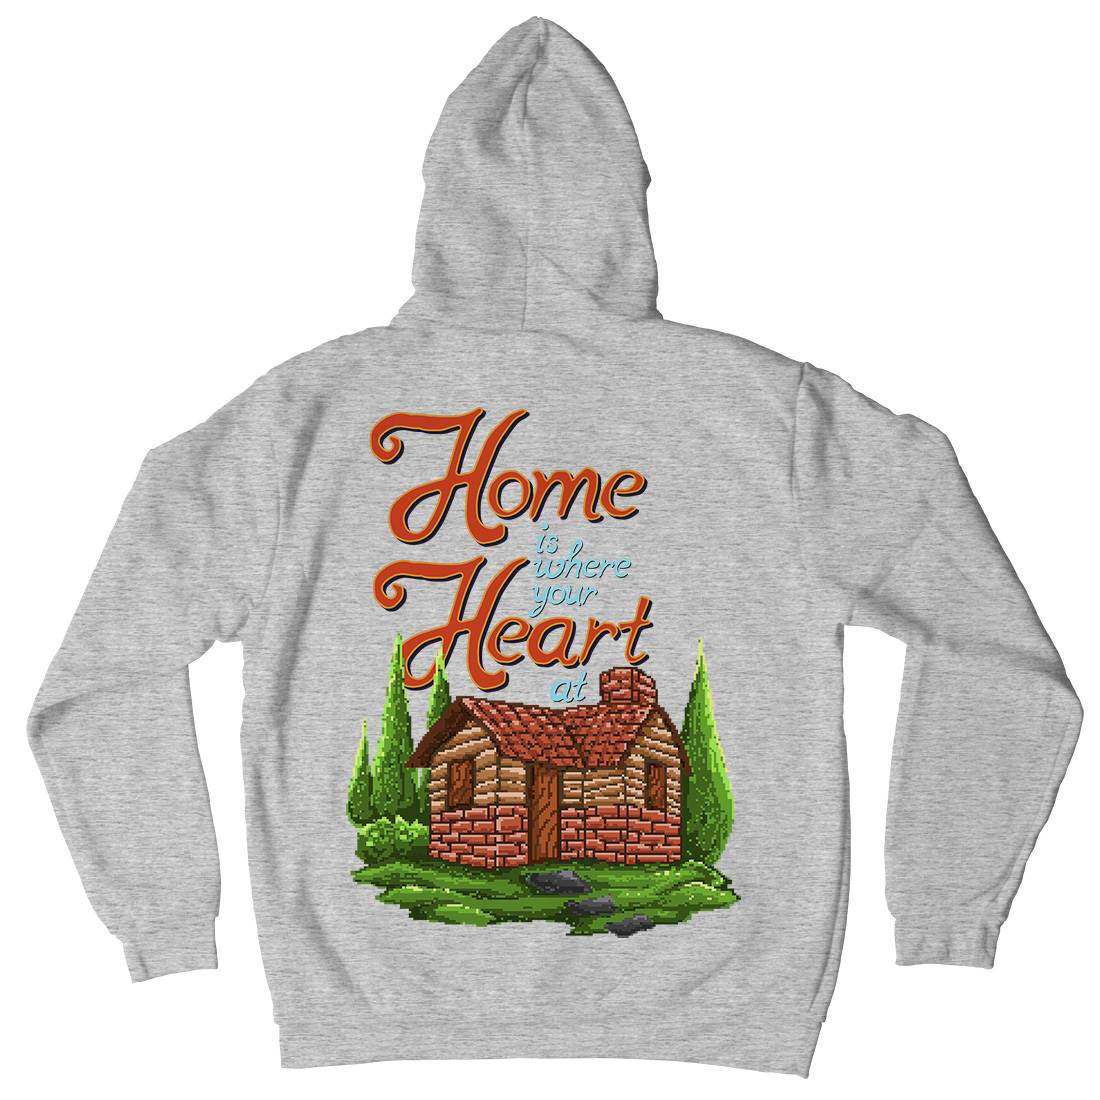 House Is Where Your Heart At Mens Hoodie With Pocket Nature B912